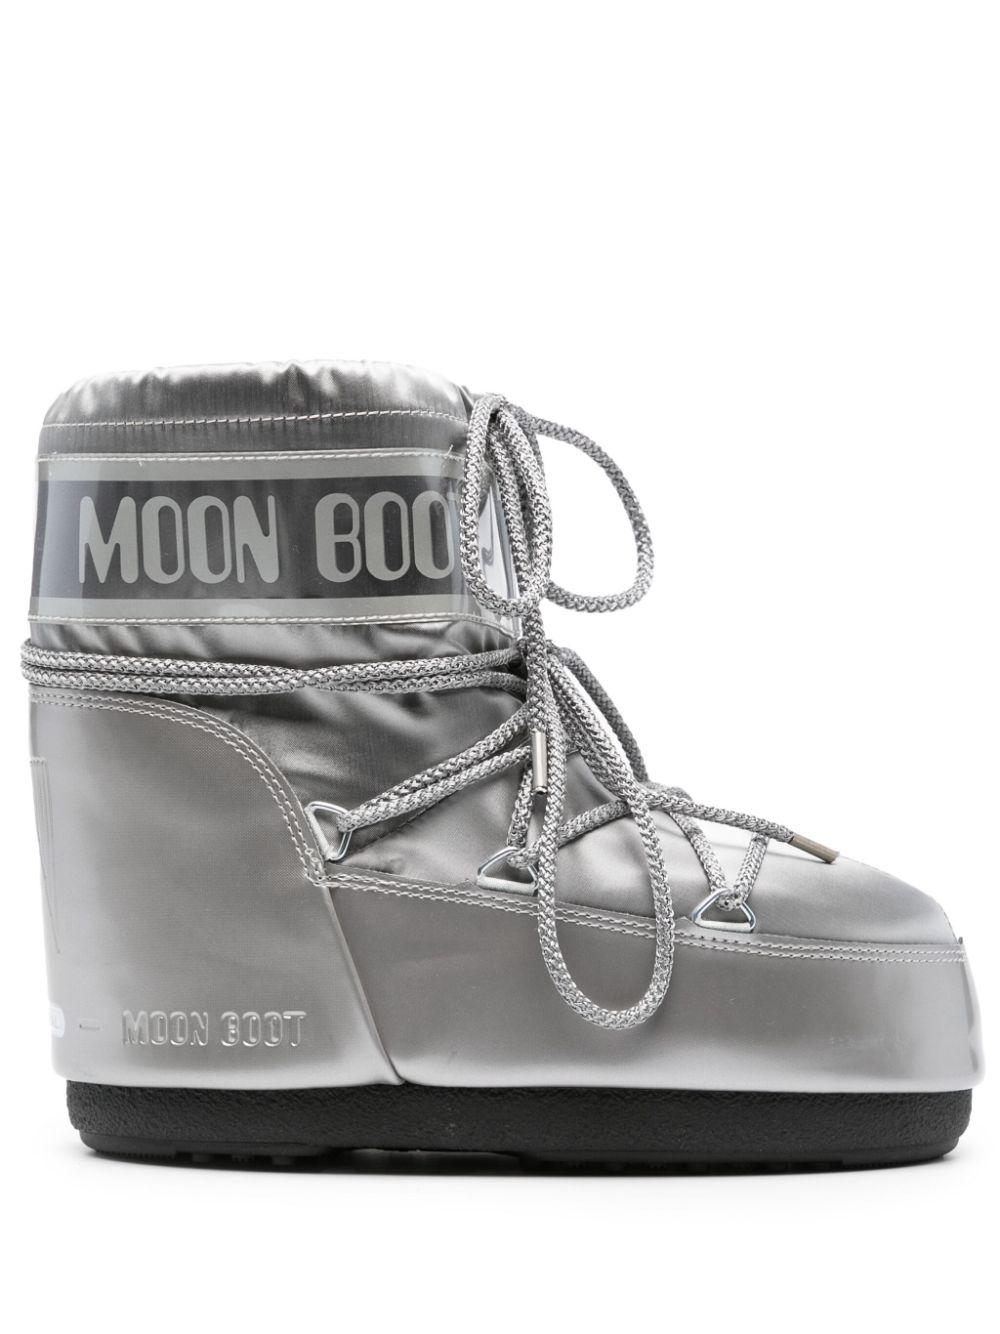 Black Icon snow boots, Moon Boot